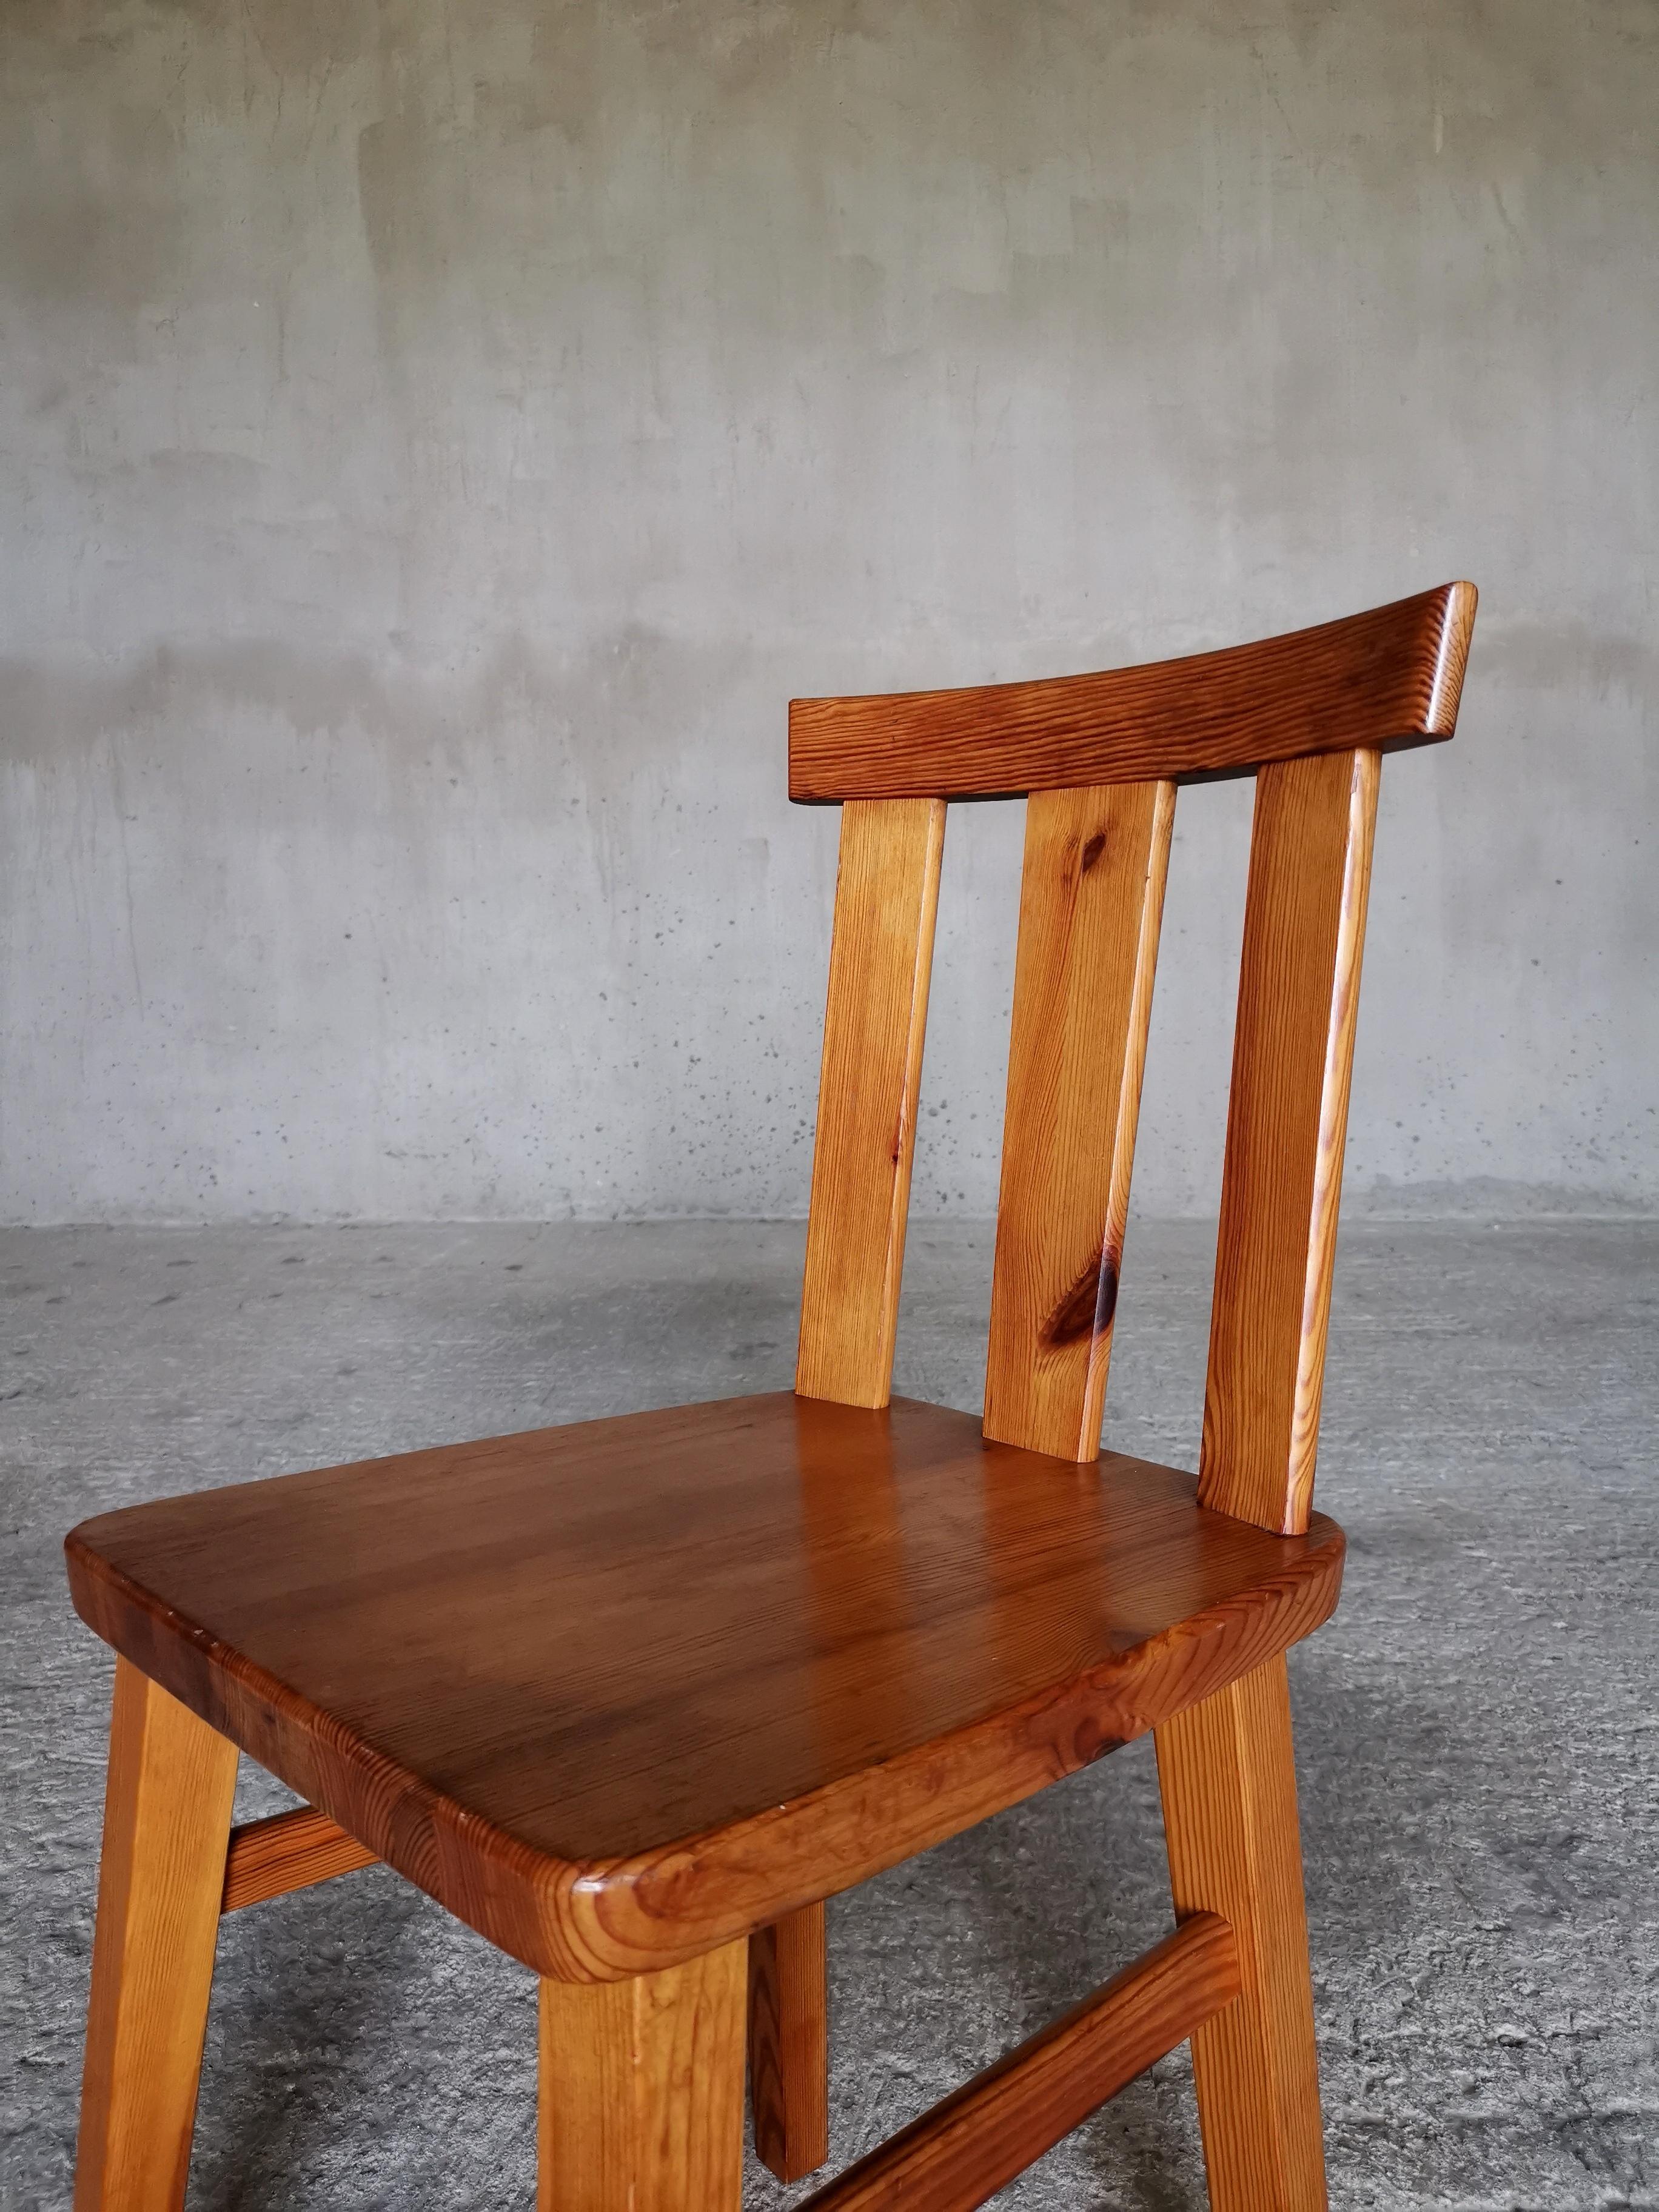 Pine Set of 3 dining chairs in solid pine, style of Axel Einar Hjorth, Sweden 1930s For Sale